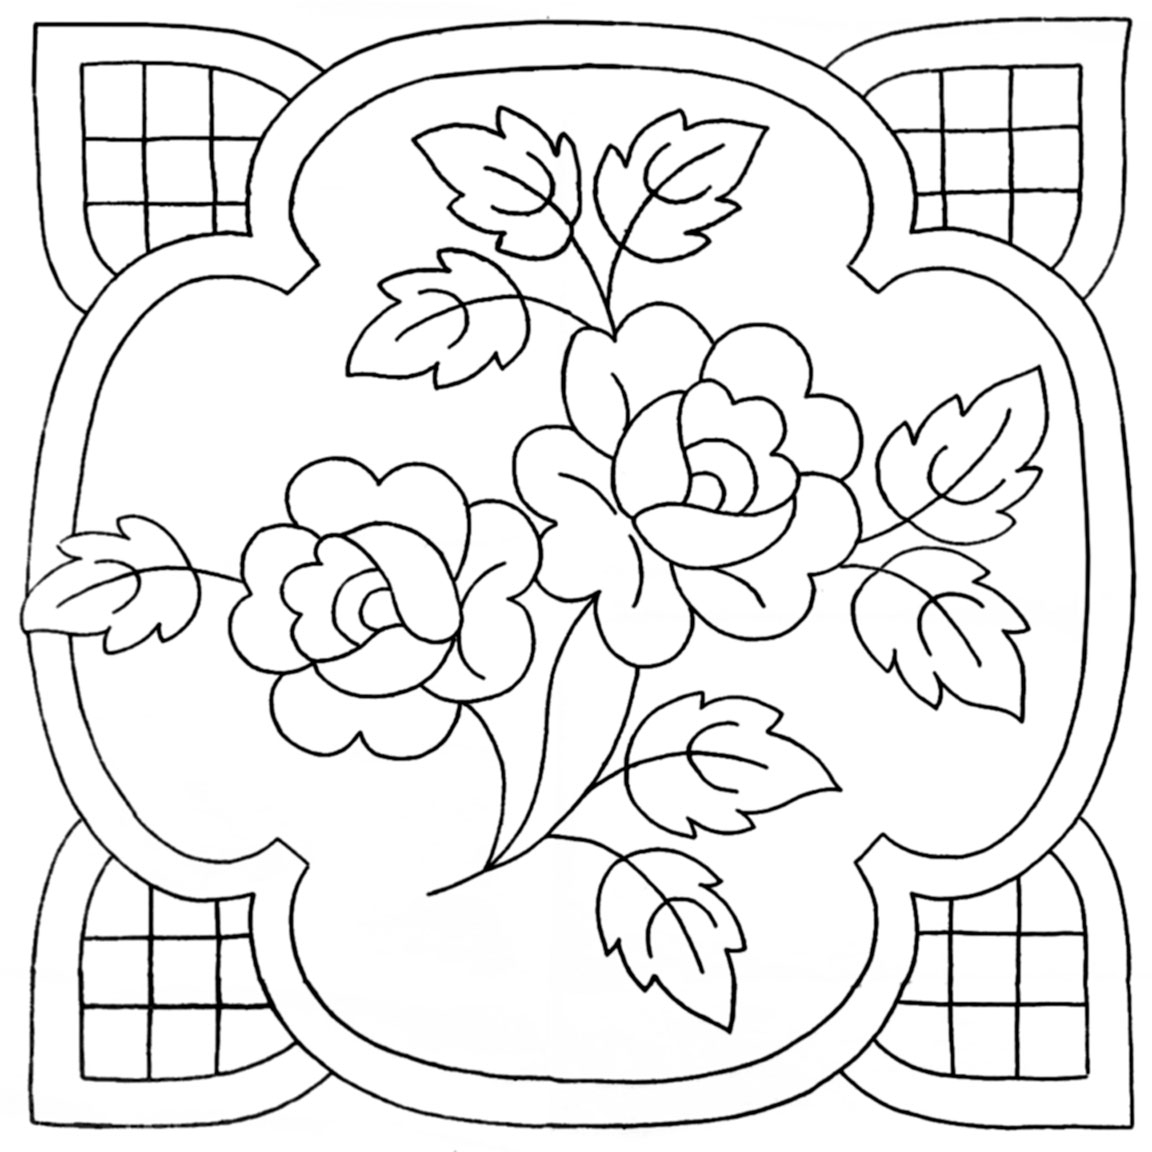 Free Hand Embroidery Patterns To Print Hand Quilting Designs From Vintage Embroidery Transfers Q Is For